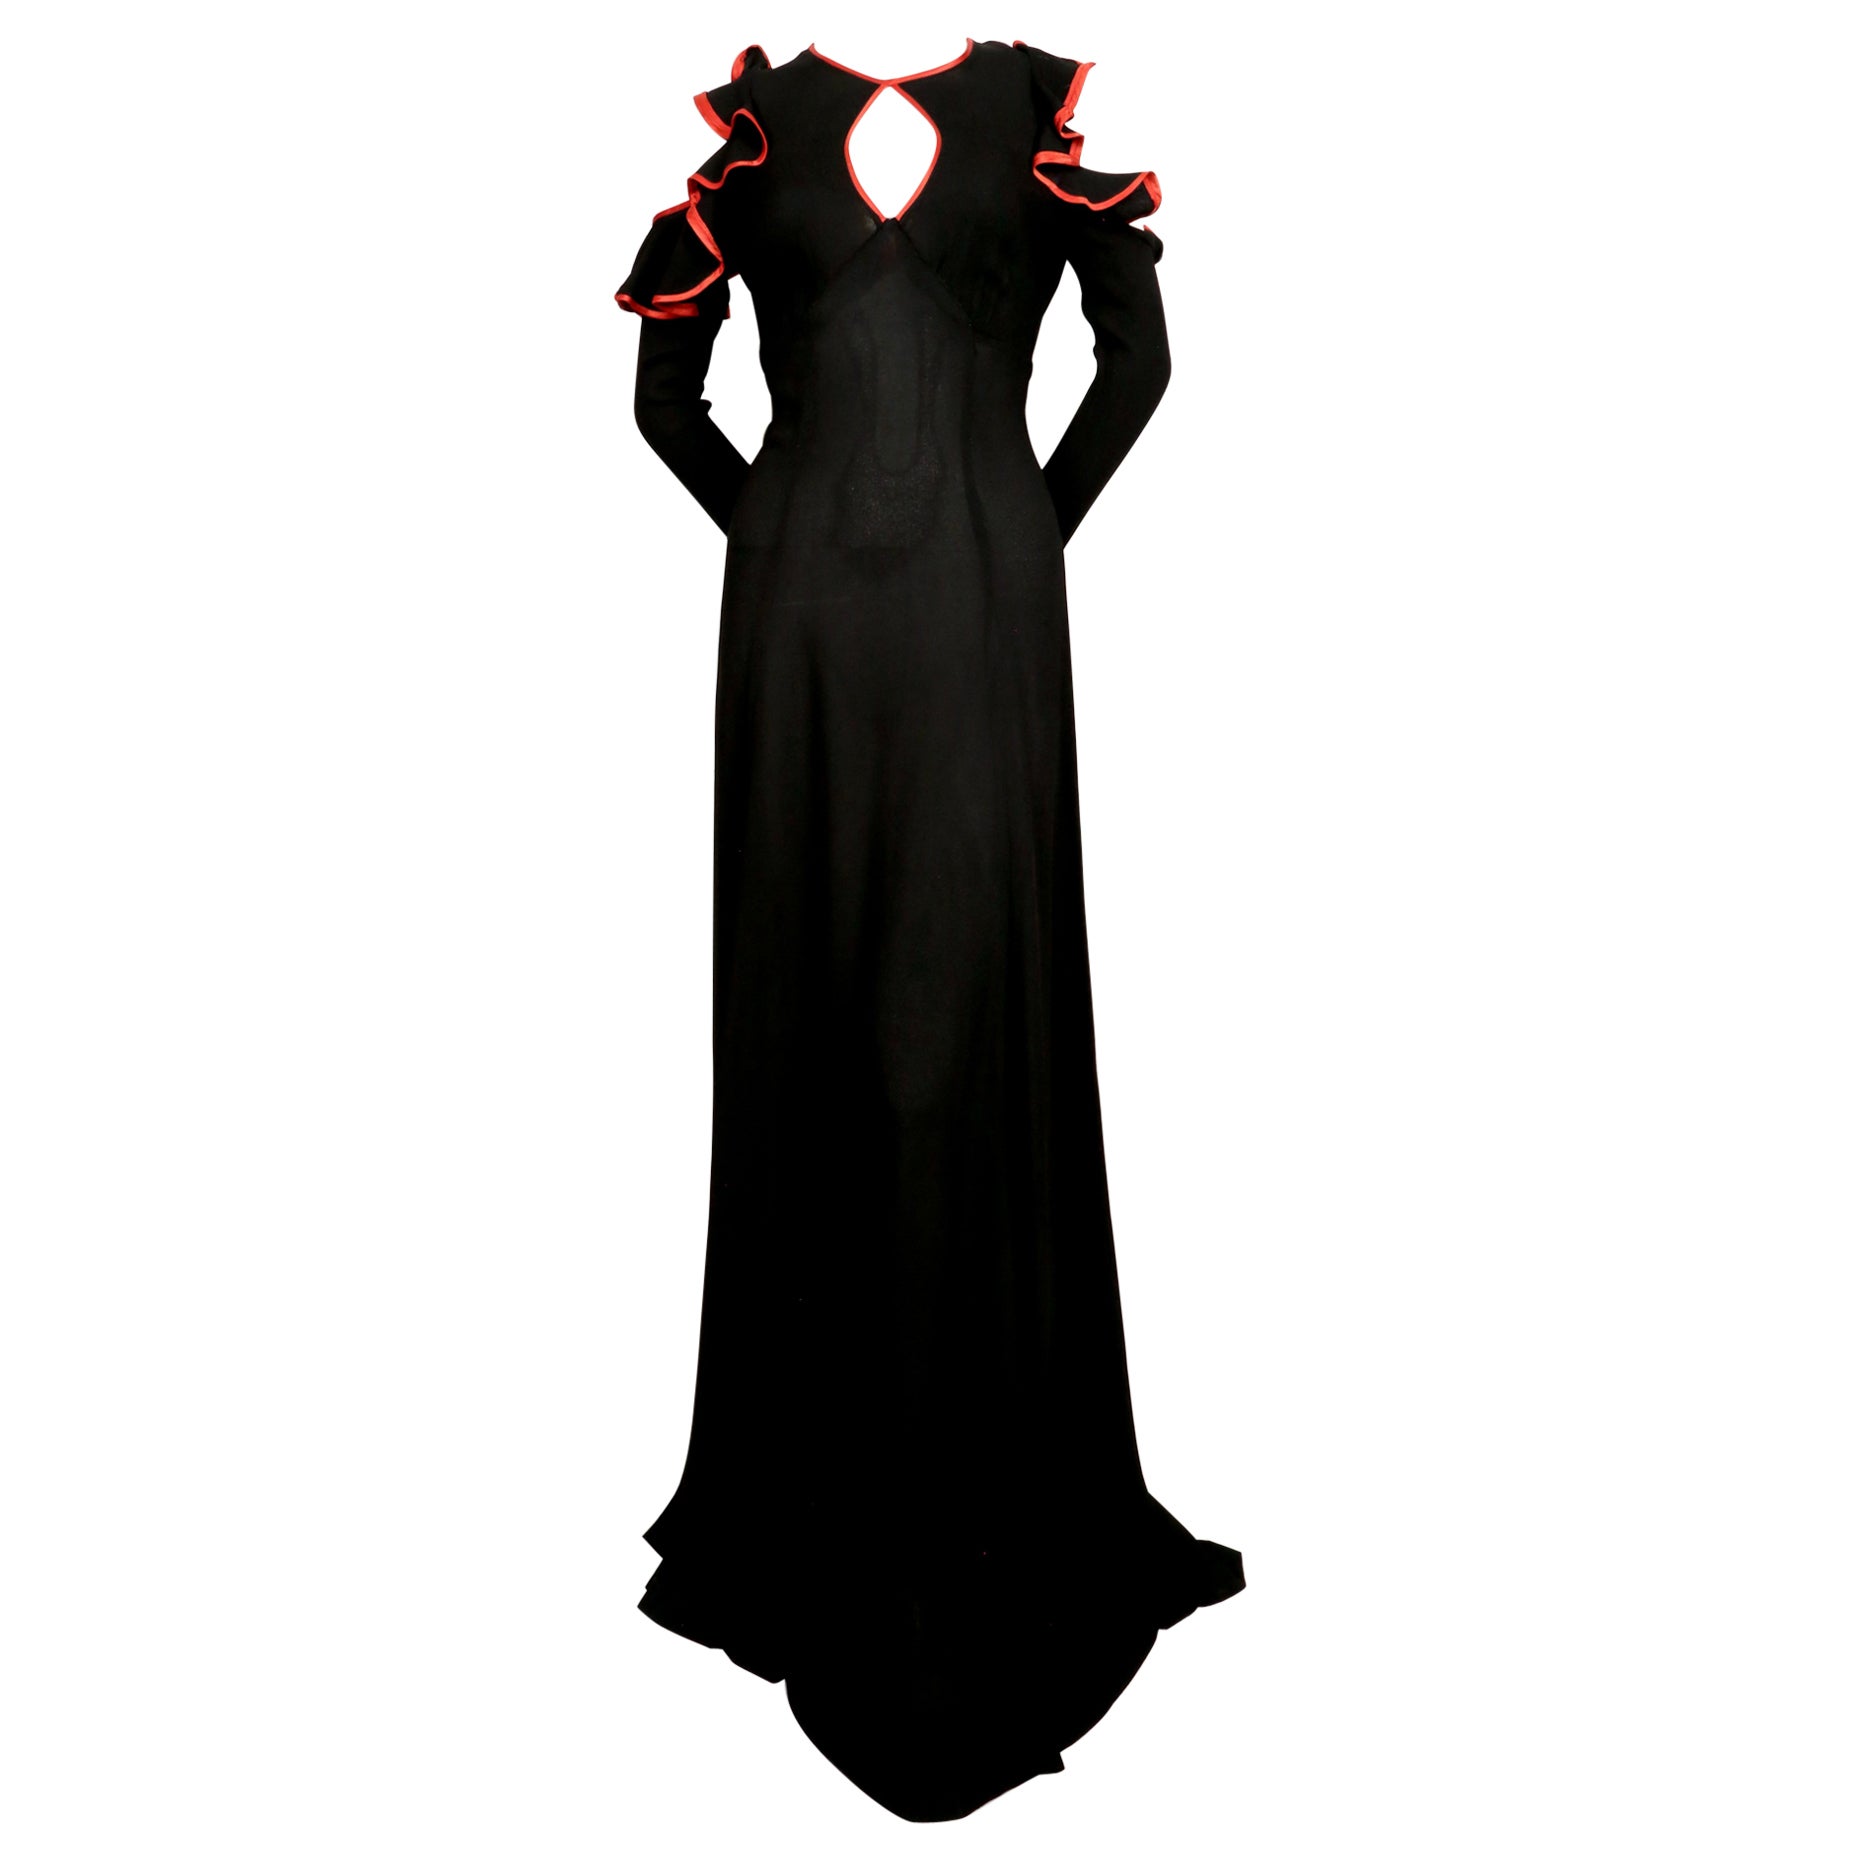 1968 OSSIE CLARK black moss crepe dress with keyhole neckline ruffles & red trim For Sale